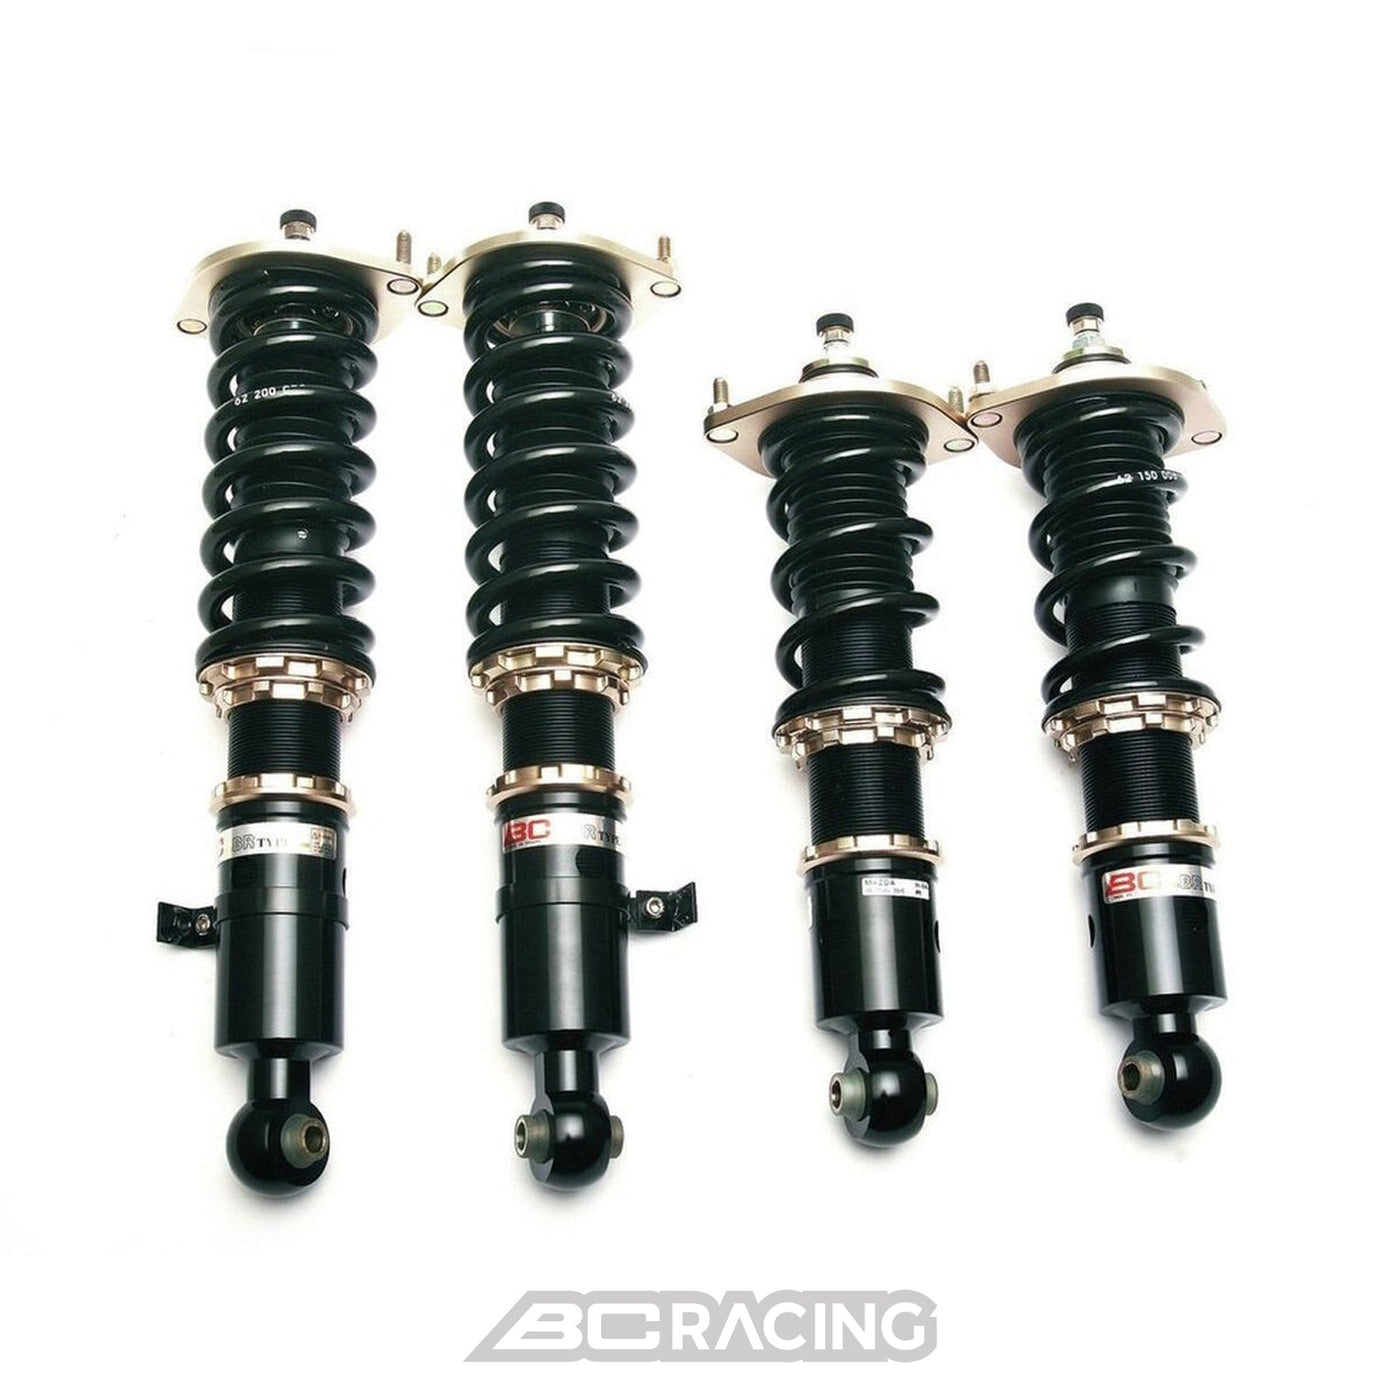 BC Racing Coilovers 1973-1979 HONDA Civic (Excludes Wagon and 78-79 Civc CVCC)